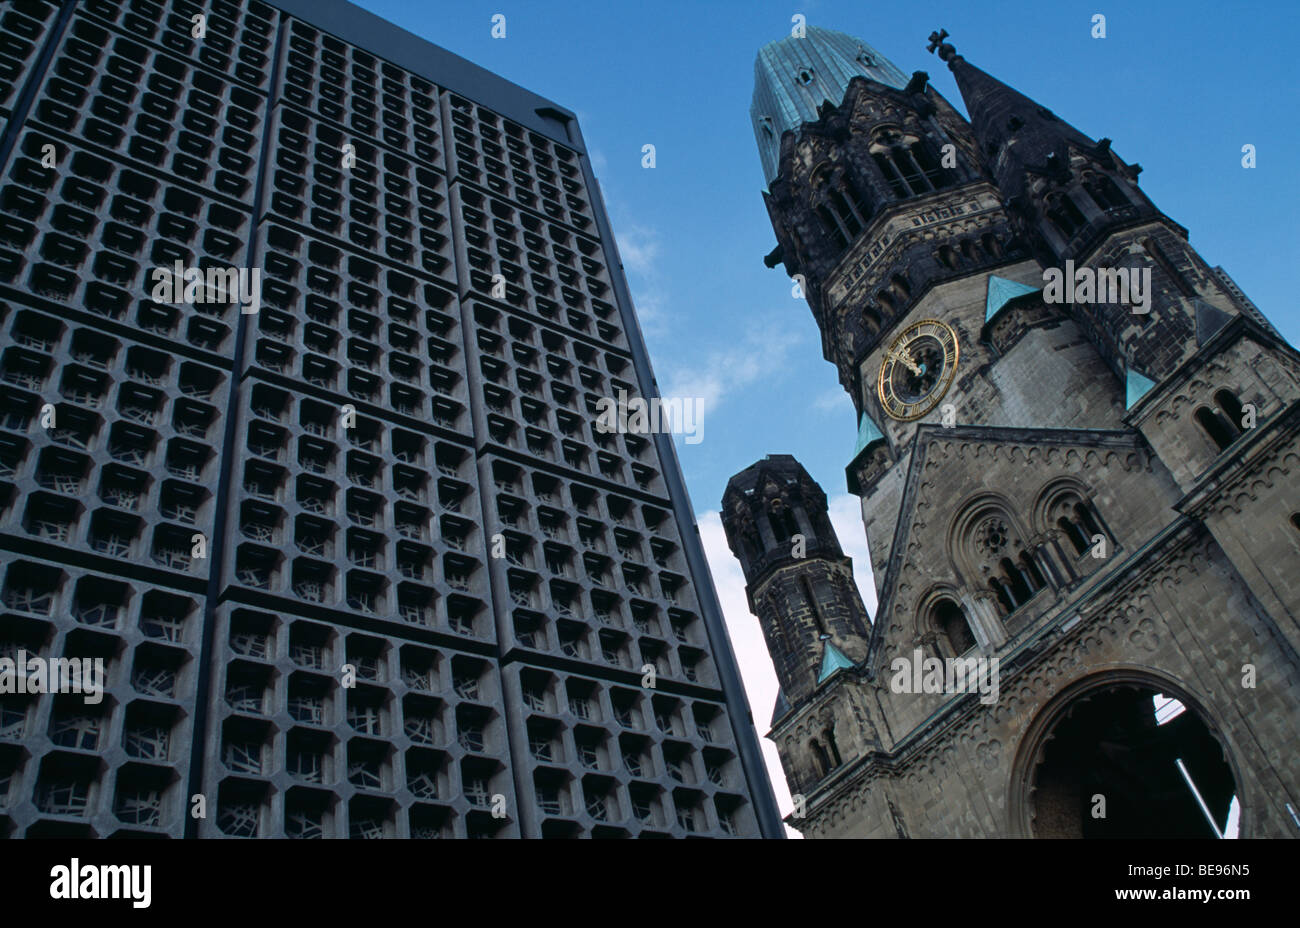 GERMANY Berlin Kaiser Wilhelm Memorial Church. Part view of ruined Gothic exterior with clock face beside new building. Stock Photo